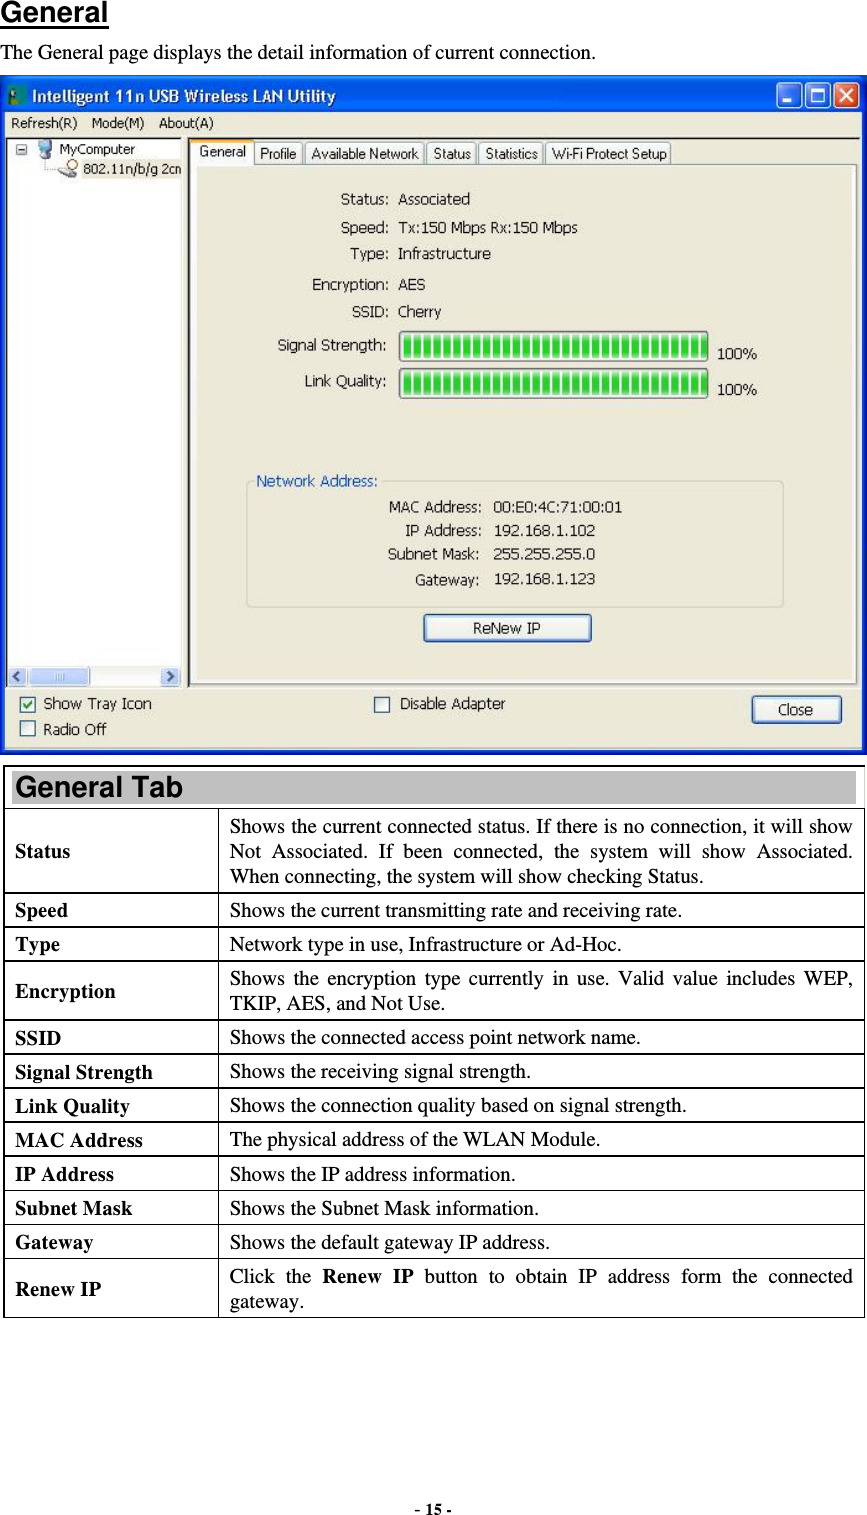  - 15 -  General The General page displays the detail information of current connection.  General Tab Status Shows the current connected status. If there is no connection, it will show Not Associated. If been connected, the system will show Associated. When connecting, the system will show checking Status. Speed  Shows the current transmitting rate and receiving rate. Type  Network type in use, Infrastructure or Ad-Hoc. Encryption  Shows the encryption type currently in use. Valid value includes WEP, TKIP, AES, and Not Use. SSID  Shows the connected access point network name. Signal Strength  Shows the receiving signal strength. Link Quality  Shows the connection quality based on signal strength. MAC Address  The physical address of the WLAN Module. IP Address  Shows the IP address information. Subnet Mask  Shows the Subnet Mask information. Gateway  Shows the default gateway IP address. Renew IP  Click the Renew IP button to obtain IP address form the connected gateway. 